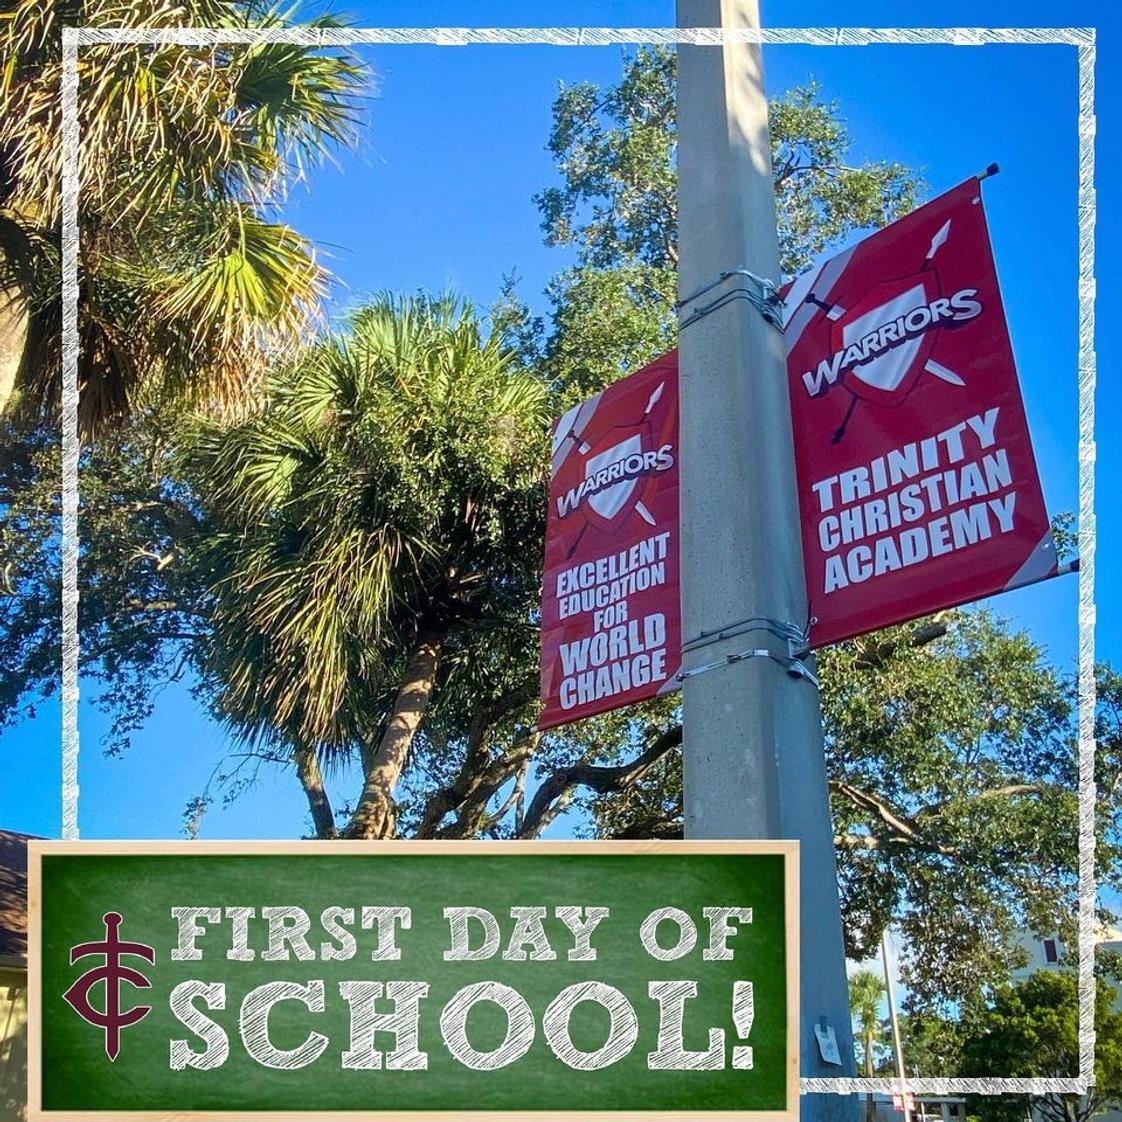 Trinity Christian Academy Photo - Welcome back, Warriors! We are so excited to be back on campus! To schedule a tour call 561-967-1900 or email gee.cindy@tcamail.org. We look forward to partnering with you!